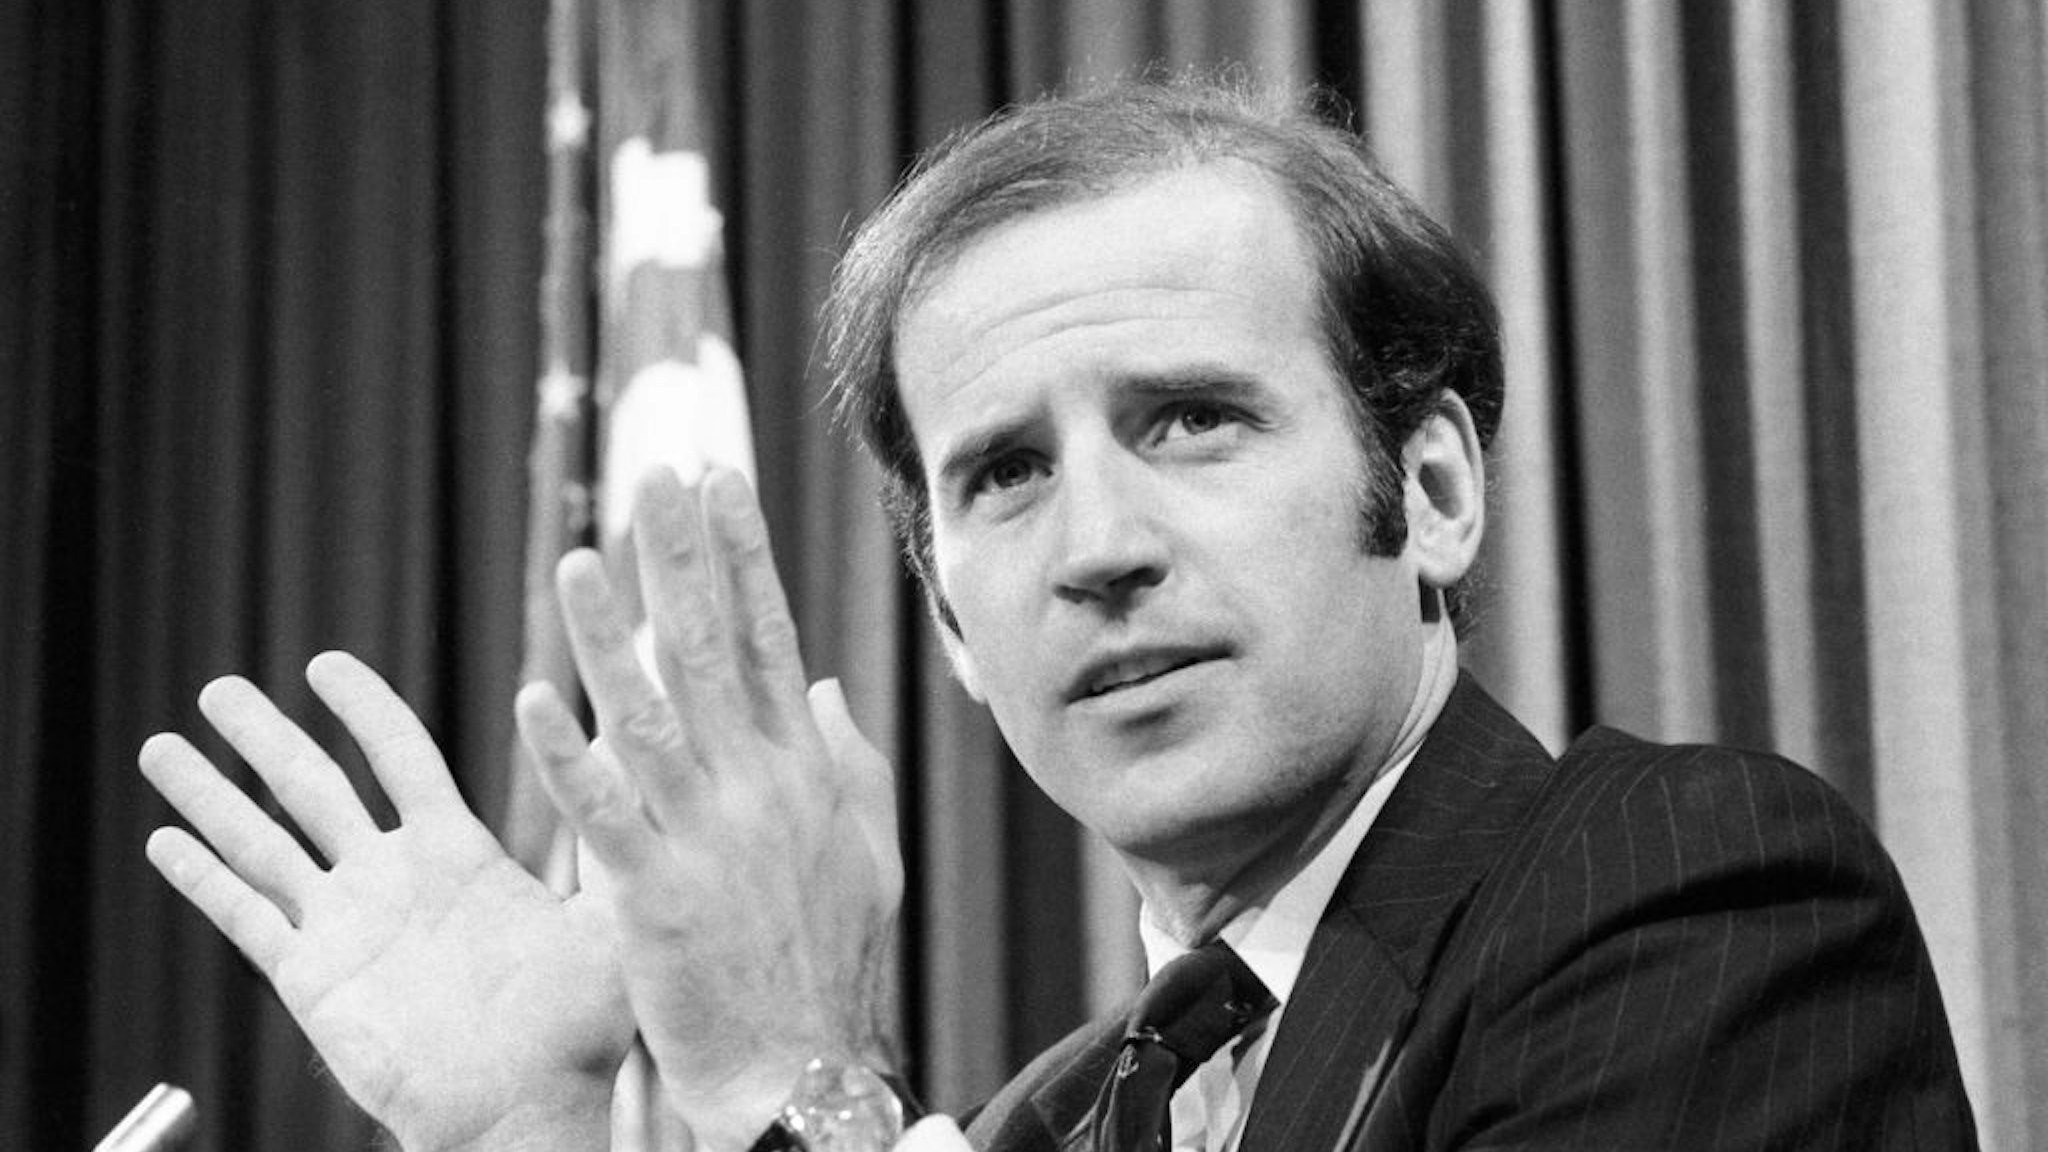 Senator Joseph Biden, Delaware, introducing the report of an 18-month investigation conducted by his Senate Intelligence subcommittee said the group reported "a major failure" by the government over the years to prosecute serious criminal leaks of sensitive information. (Photo by Bettmann Archive/Getty Images)